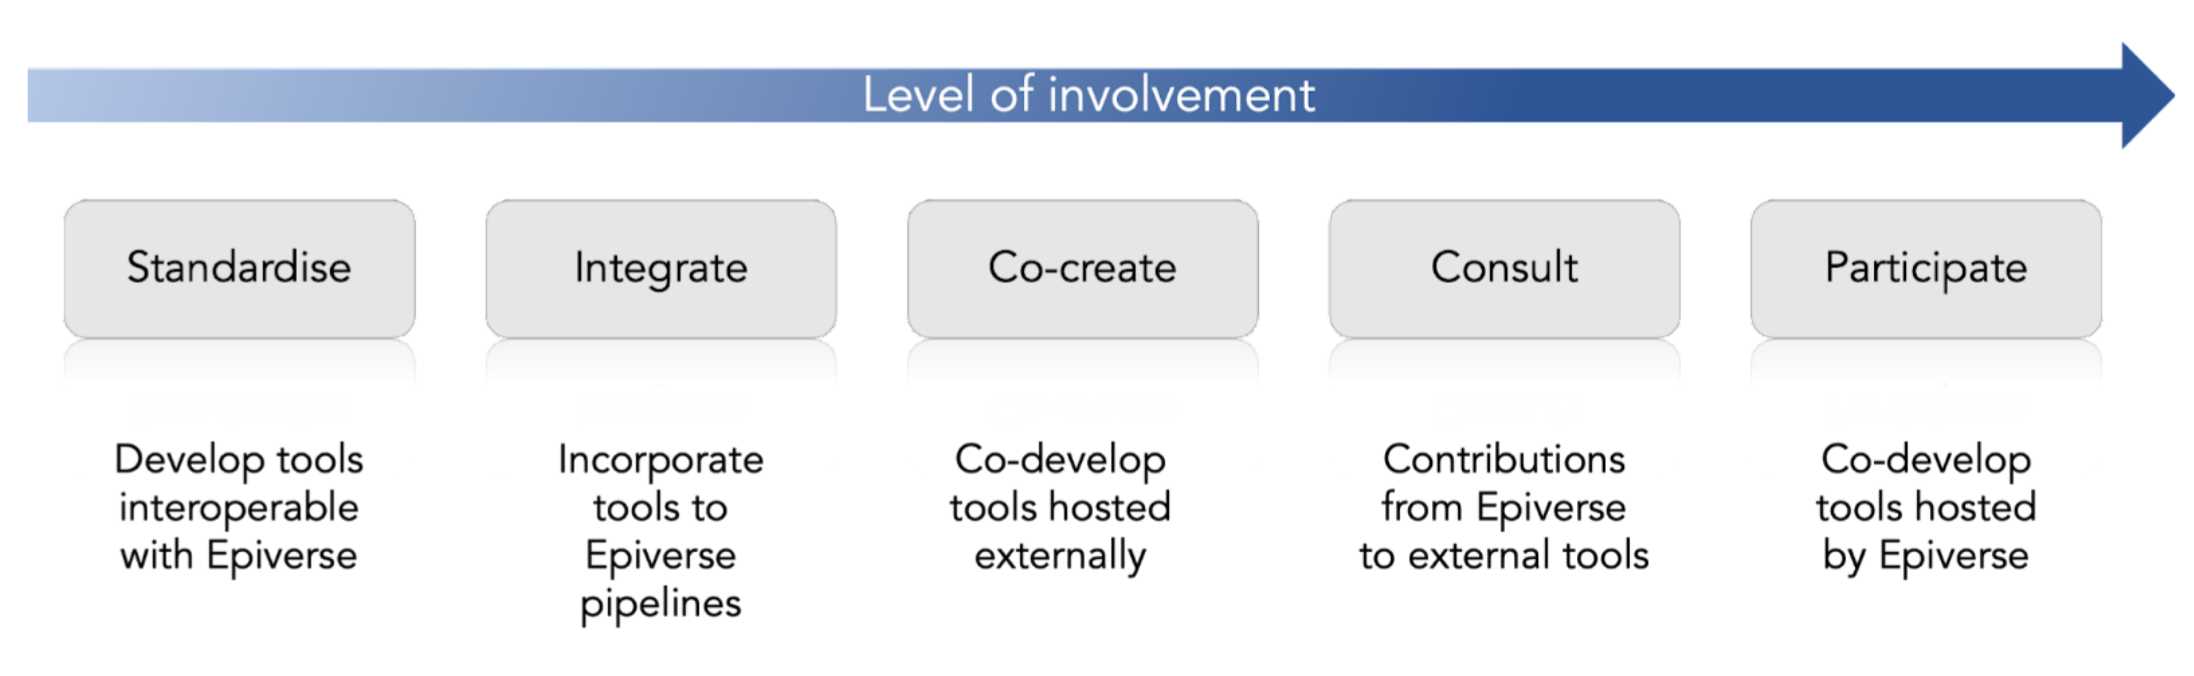 Figure summarizing the models of contributions presented above, alongside an arrow indicating increasing level of involvement: standardise, integrate, co-create, consult, participate. Inspired by [CSCCE community participation model](https://doi.org/10.5281/zenodo.3997802) (Woodley, Lou, & Pratt, Katie. (2020). The CSCCE Community Participation Model – A framework to describe member engagement and information flow in STEM communities. Zenodo.)